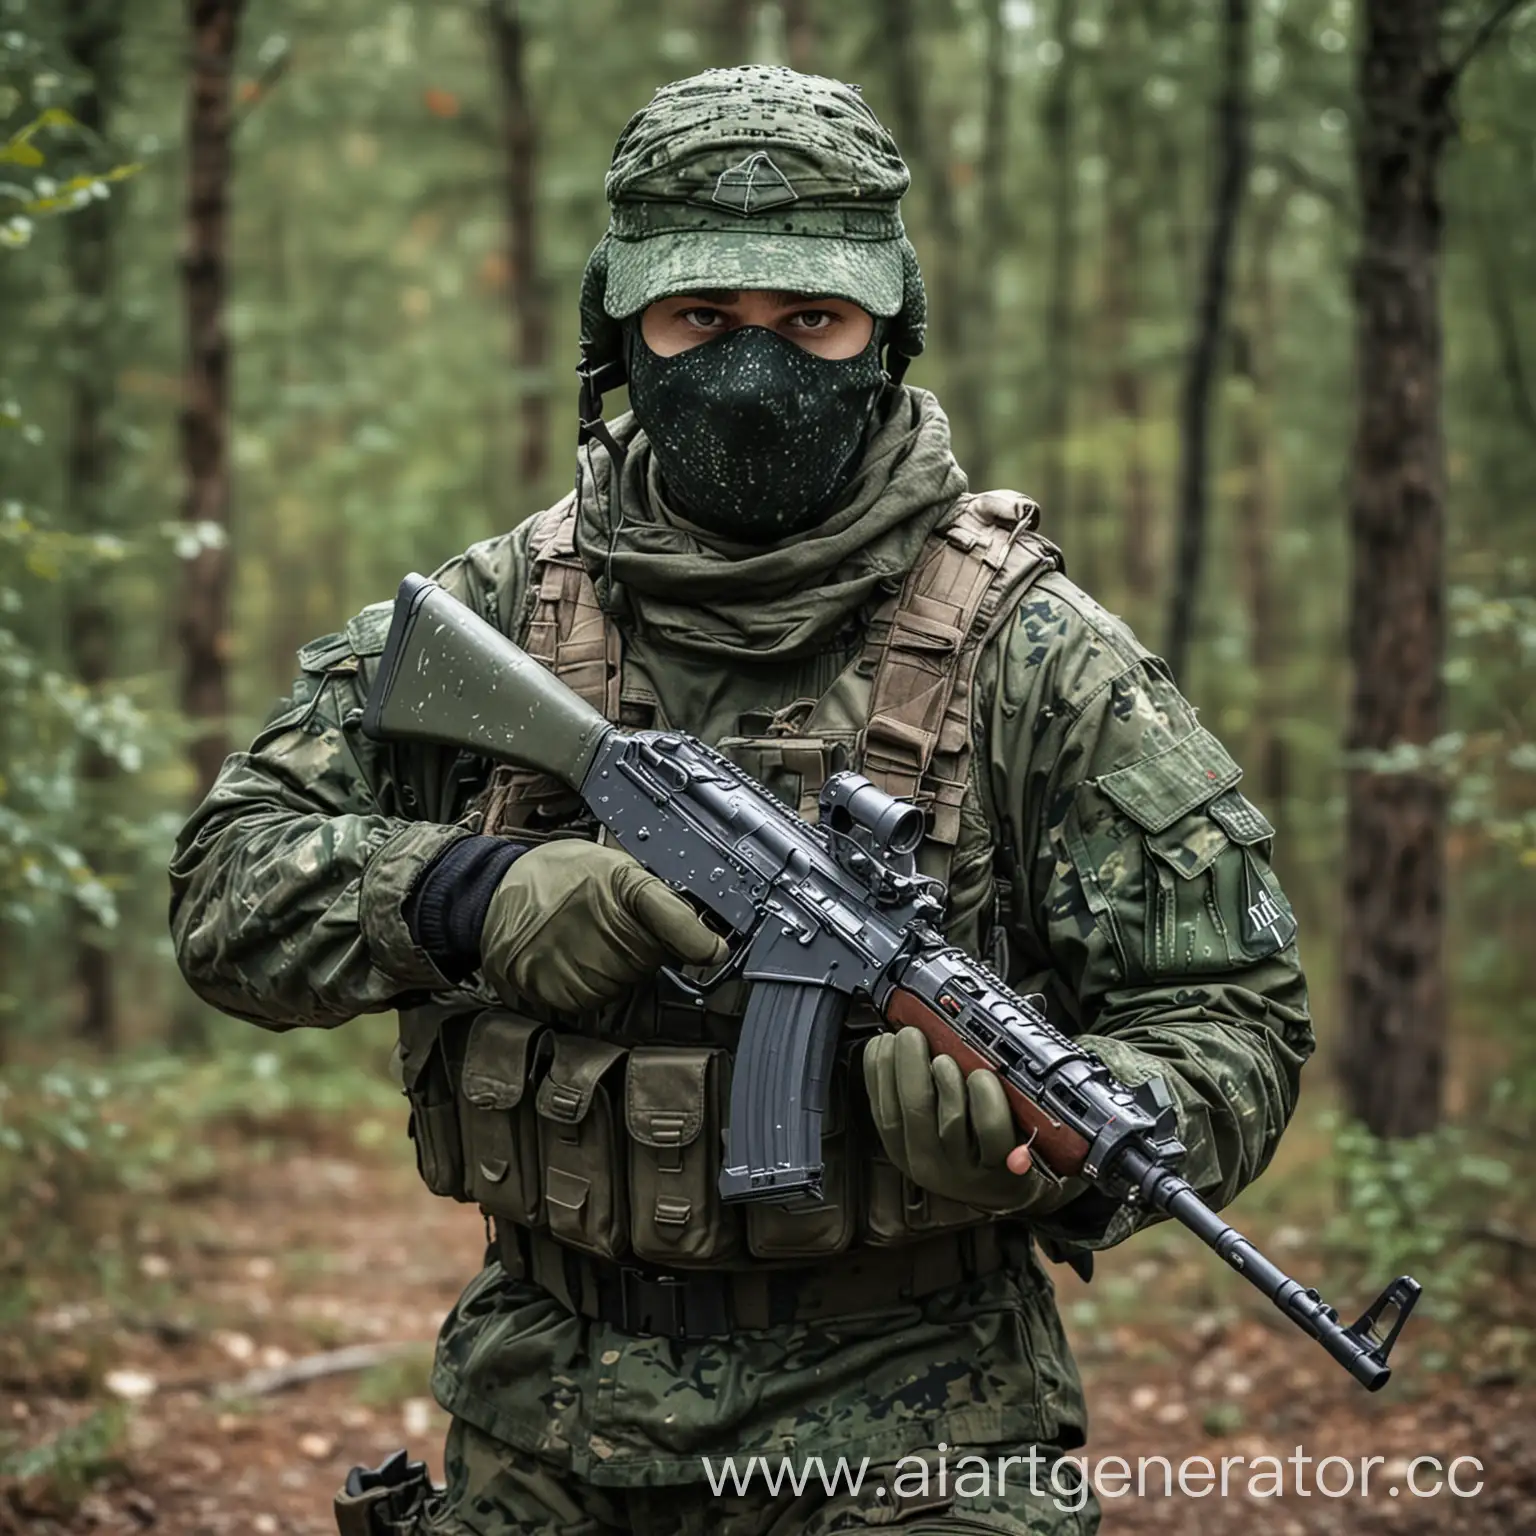 Forest-Mercenary-with-AK74M-Rifle-in-Pixelated-Camouflage